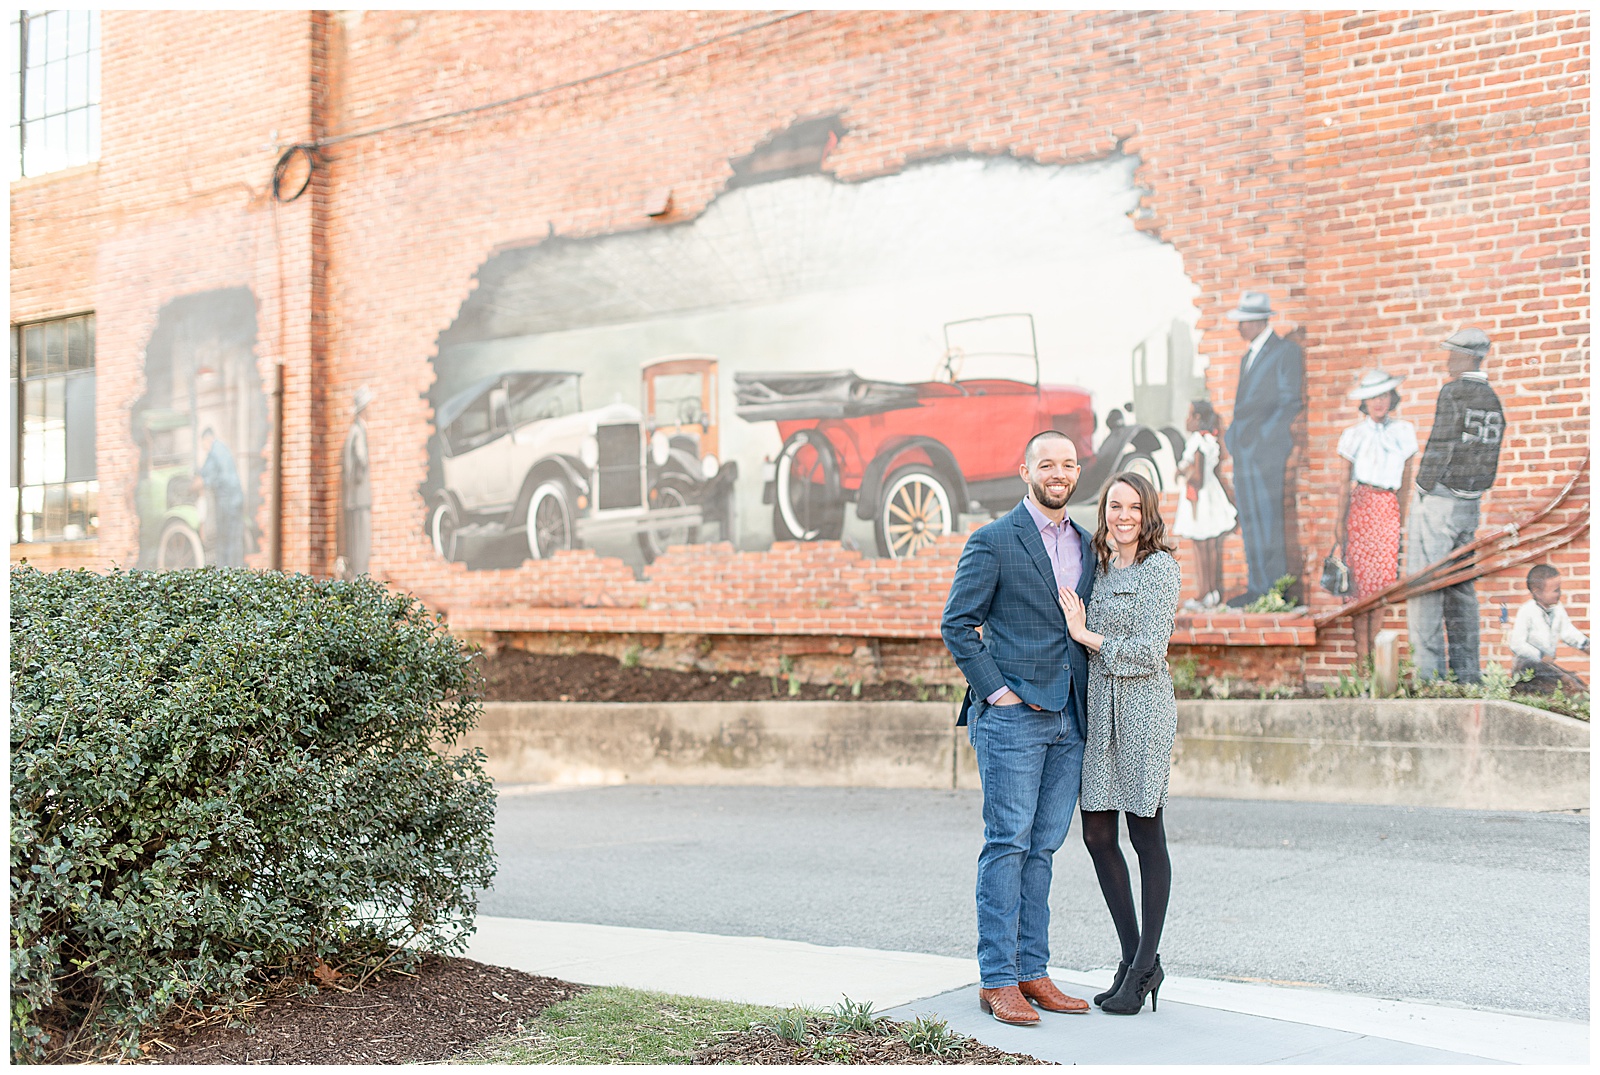 engagement session photos in fron of car mural in Ellicott City, Maryland